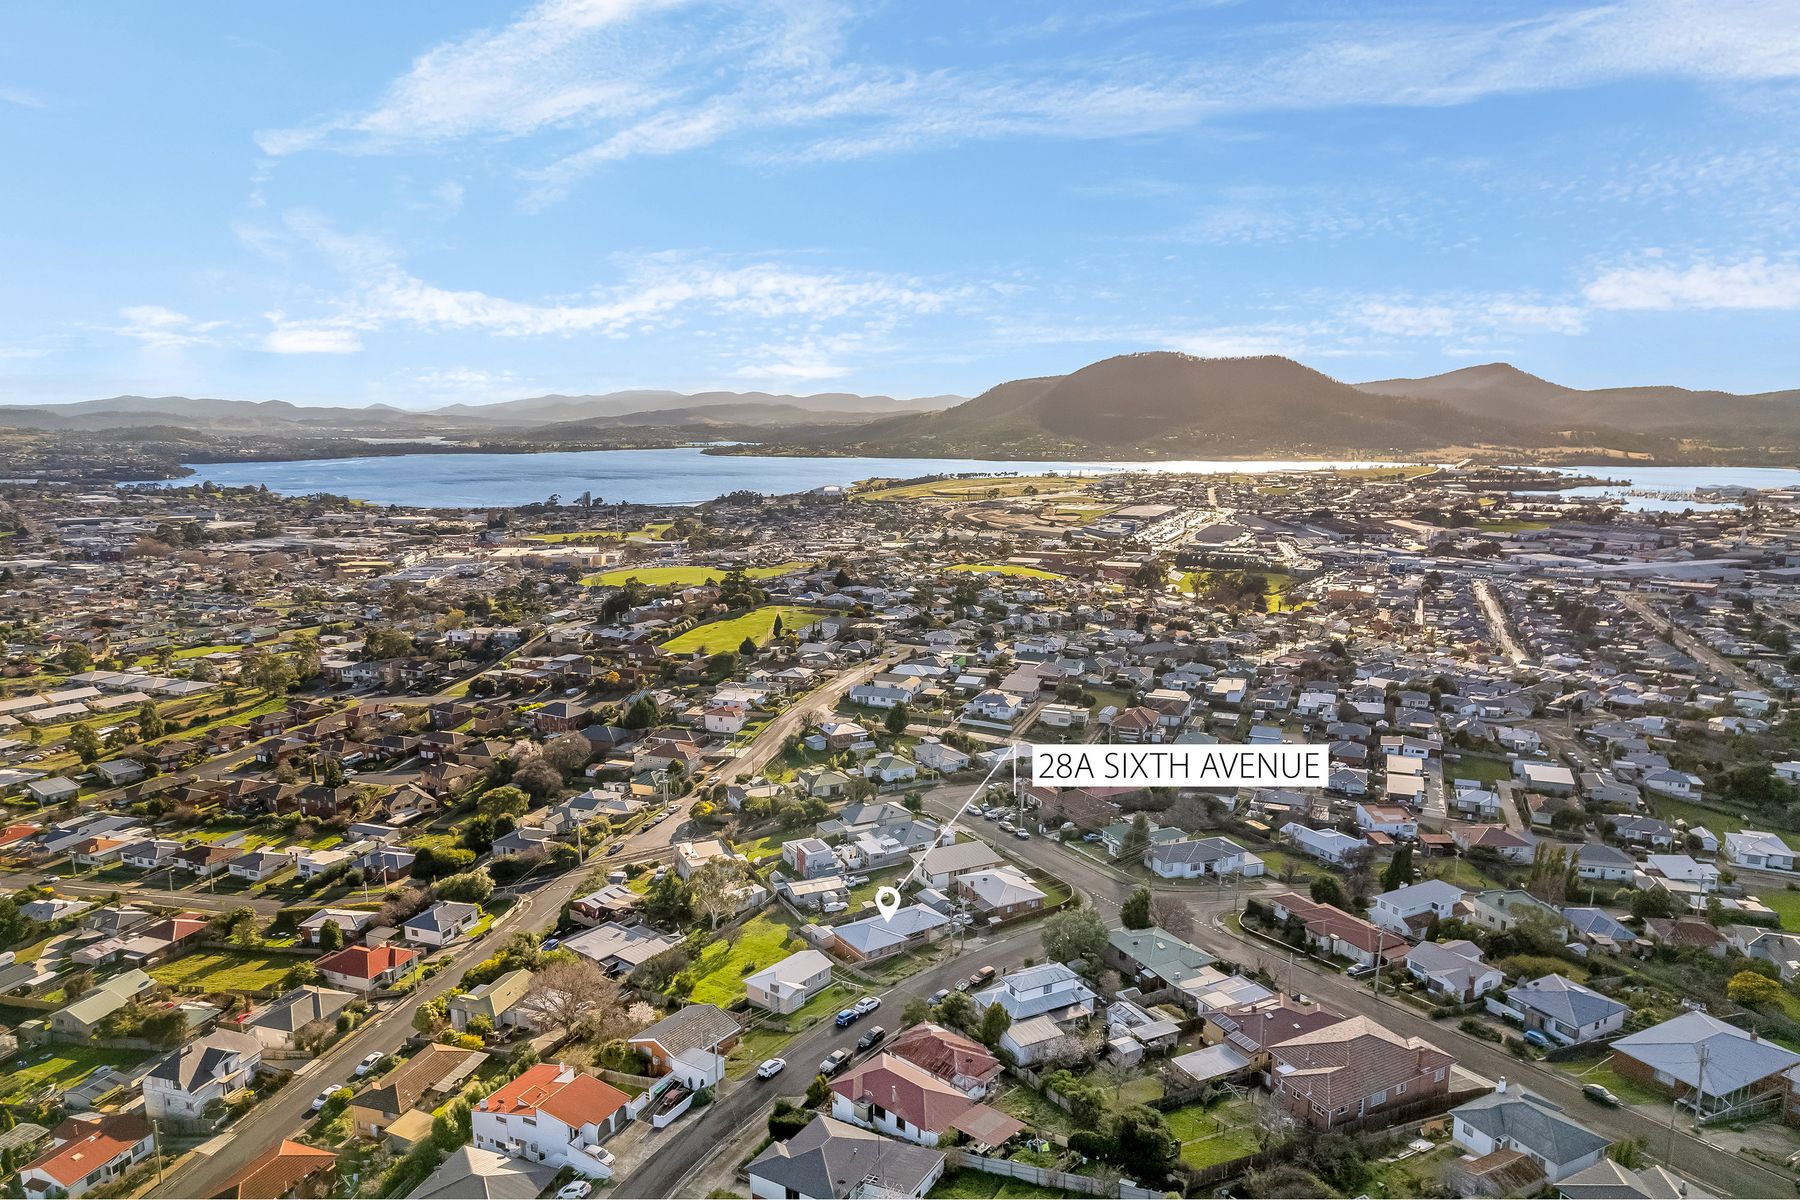 Sixth Avenue, 28A, West Moonah 5 Pin